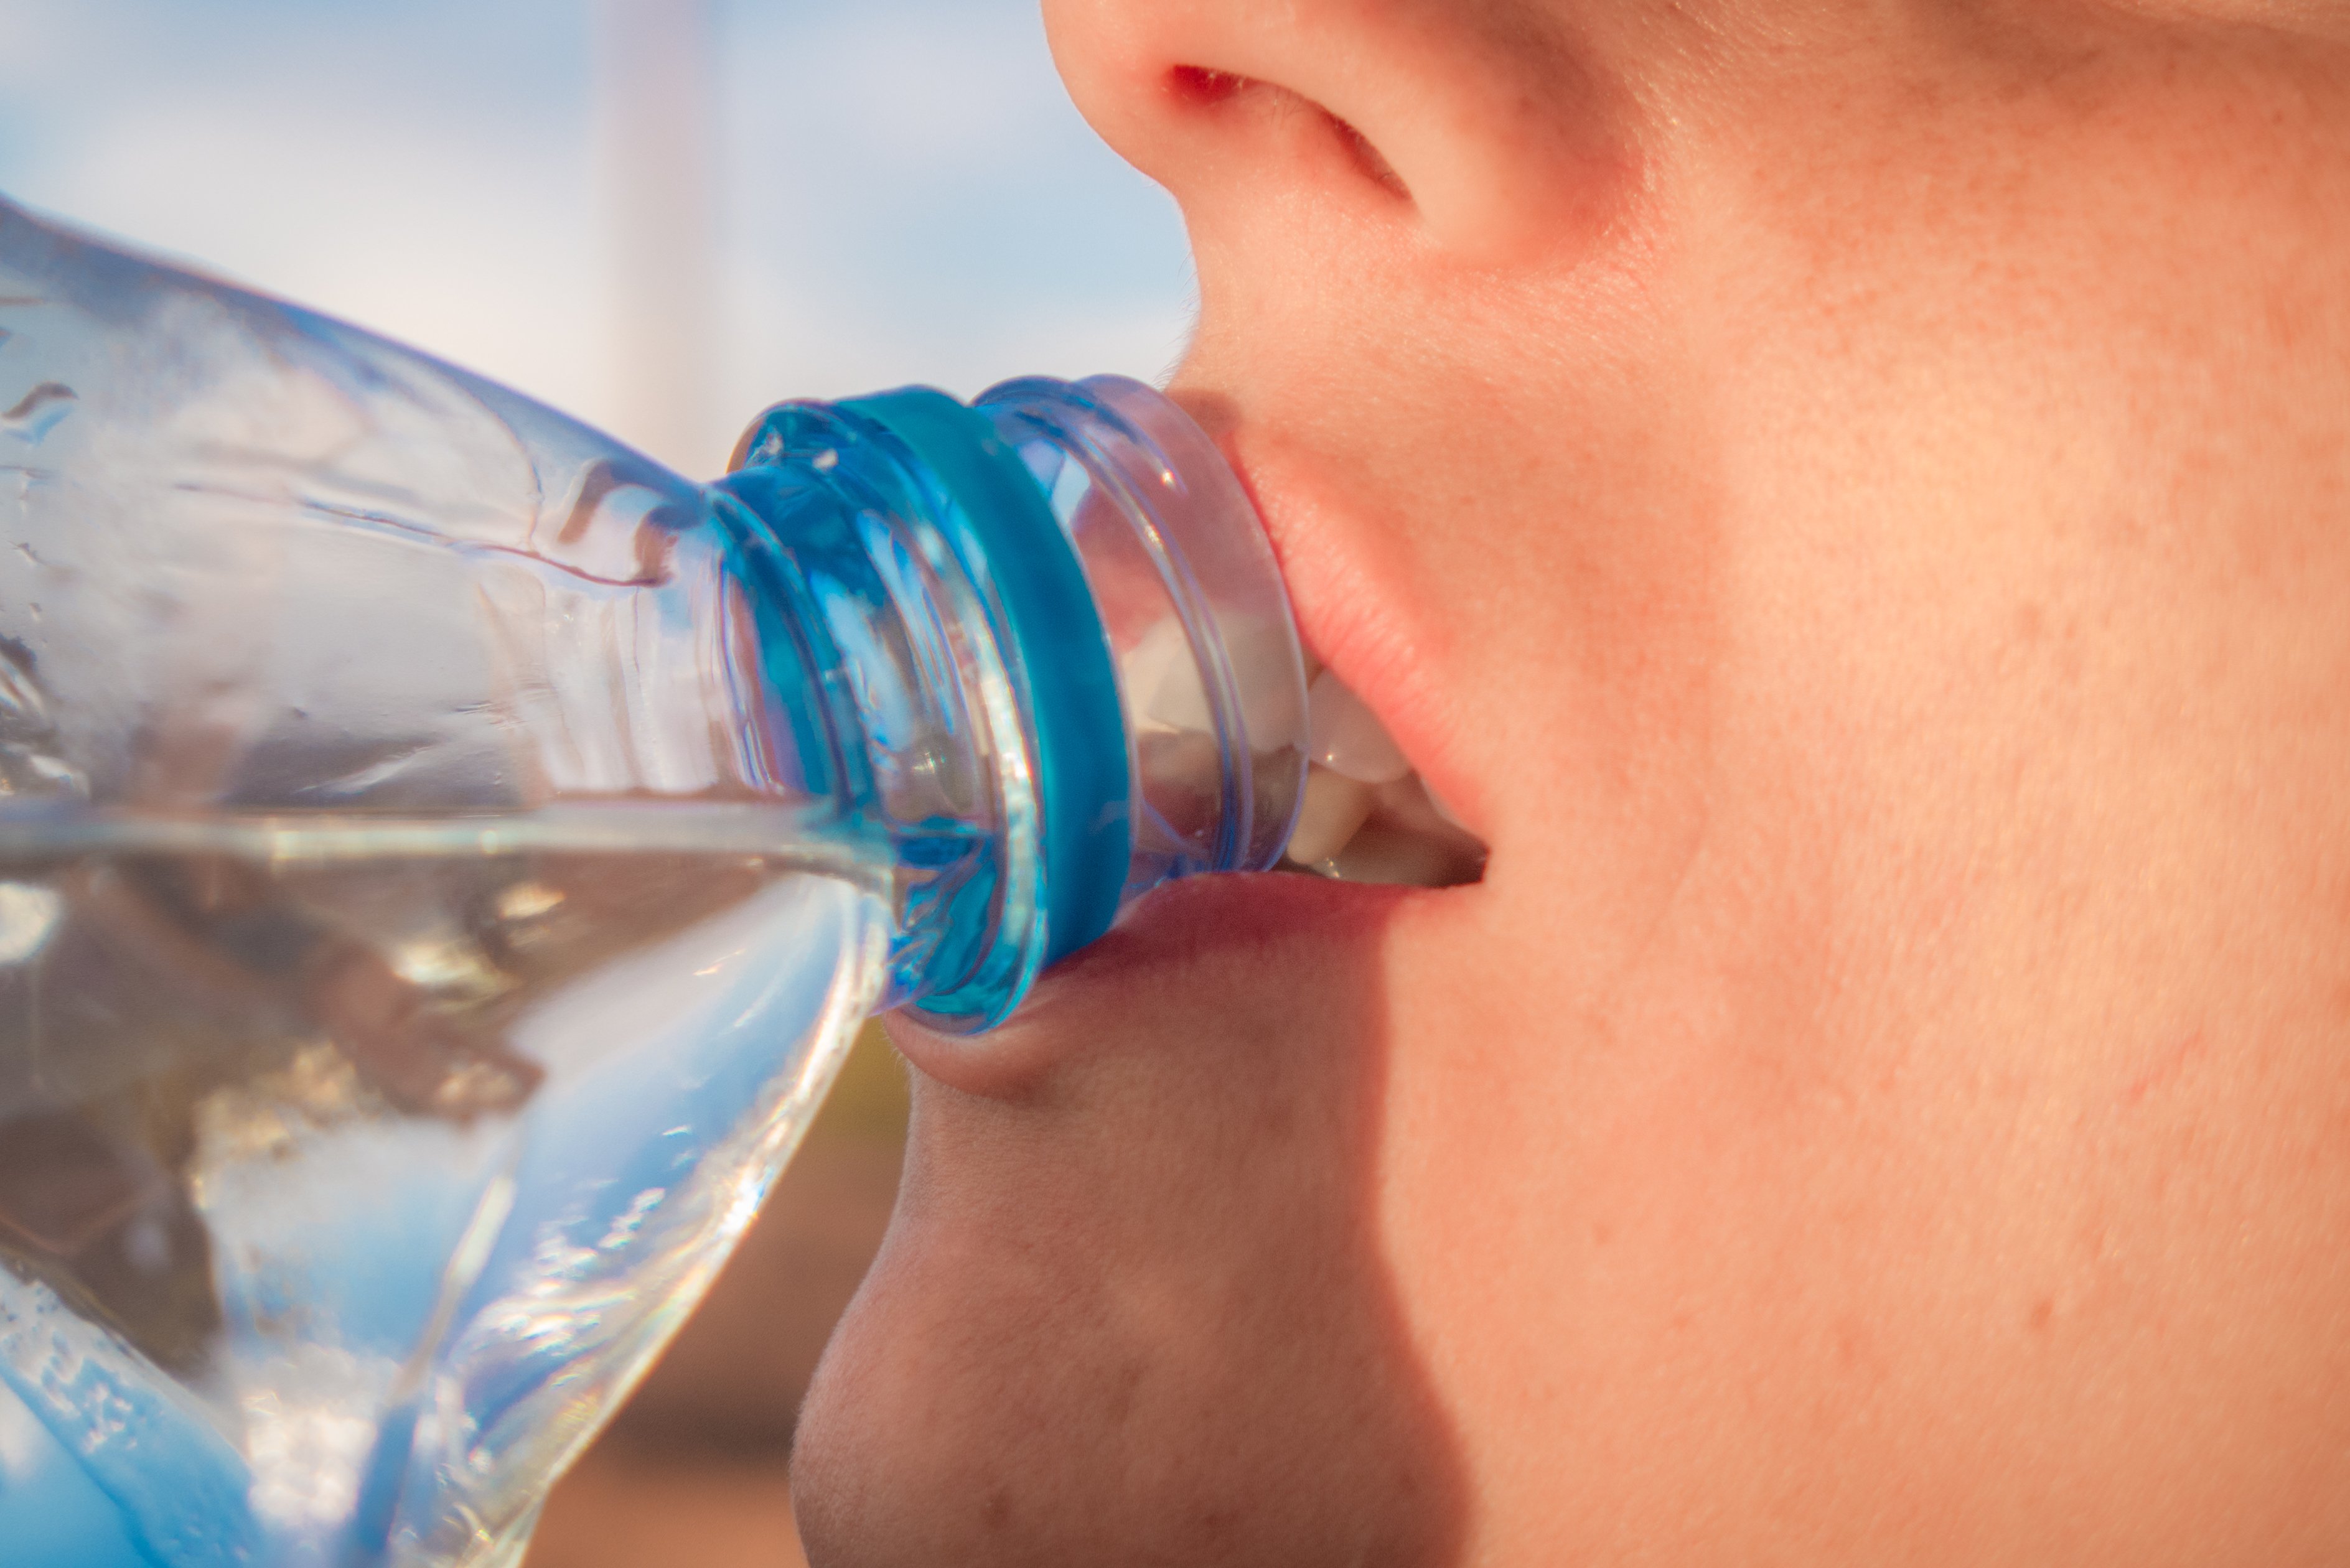 A young man drinking water from a plastic bottle. | Photo: Shutterstock